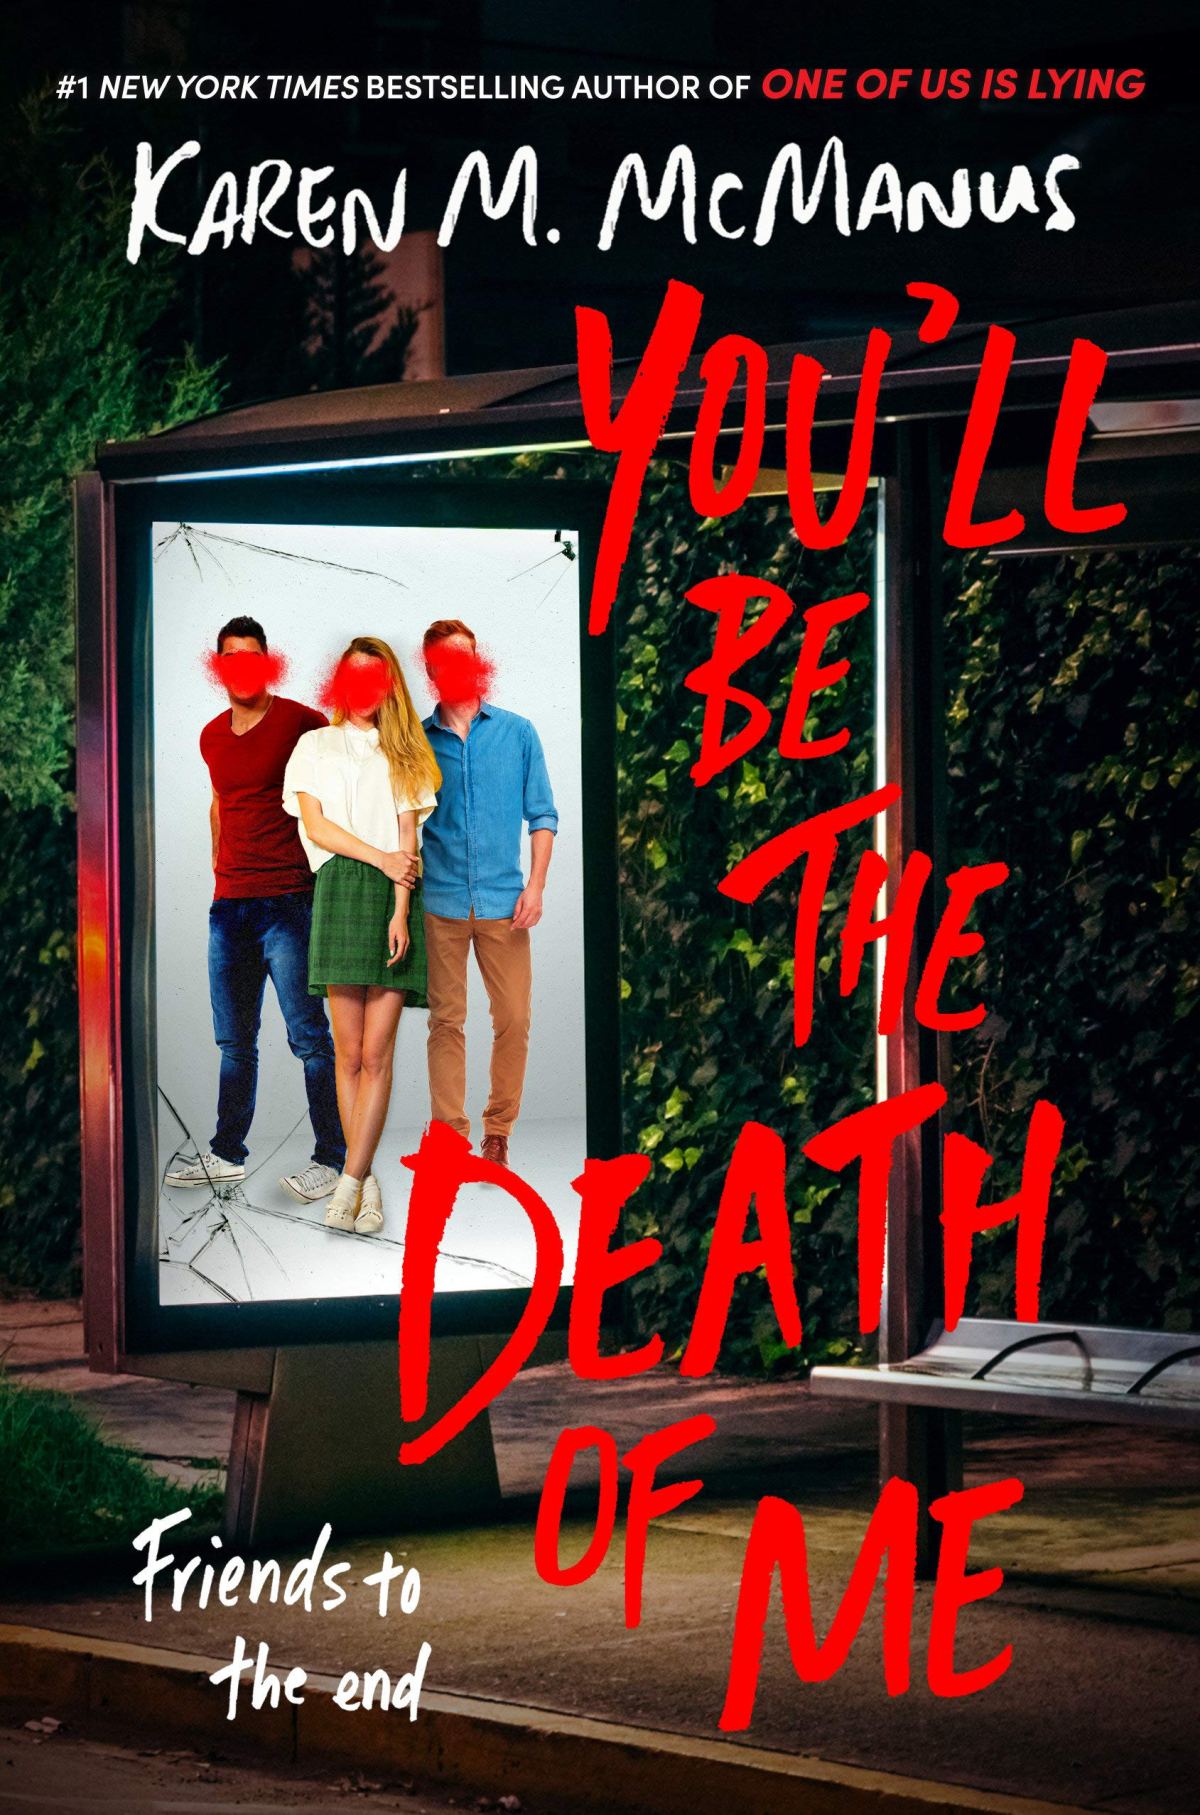 Book 158 – You’ll Be The Death of Me by Karen M. McManus